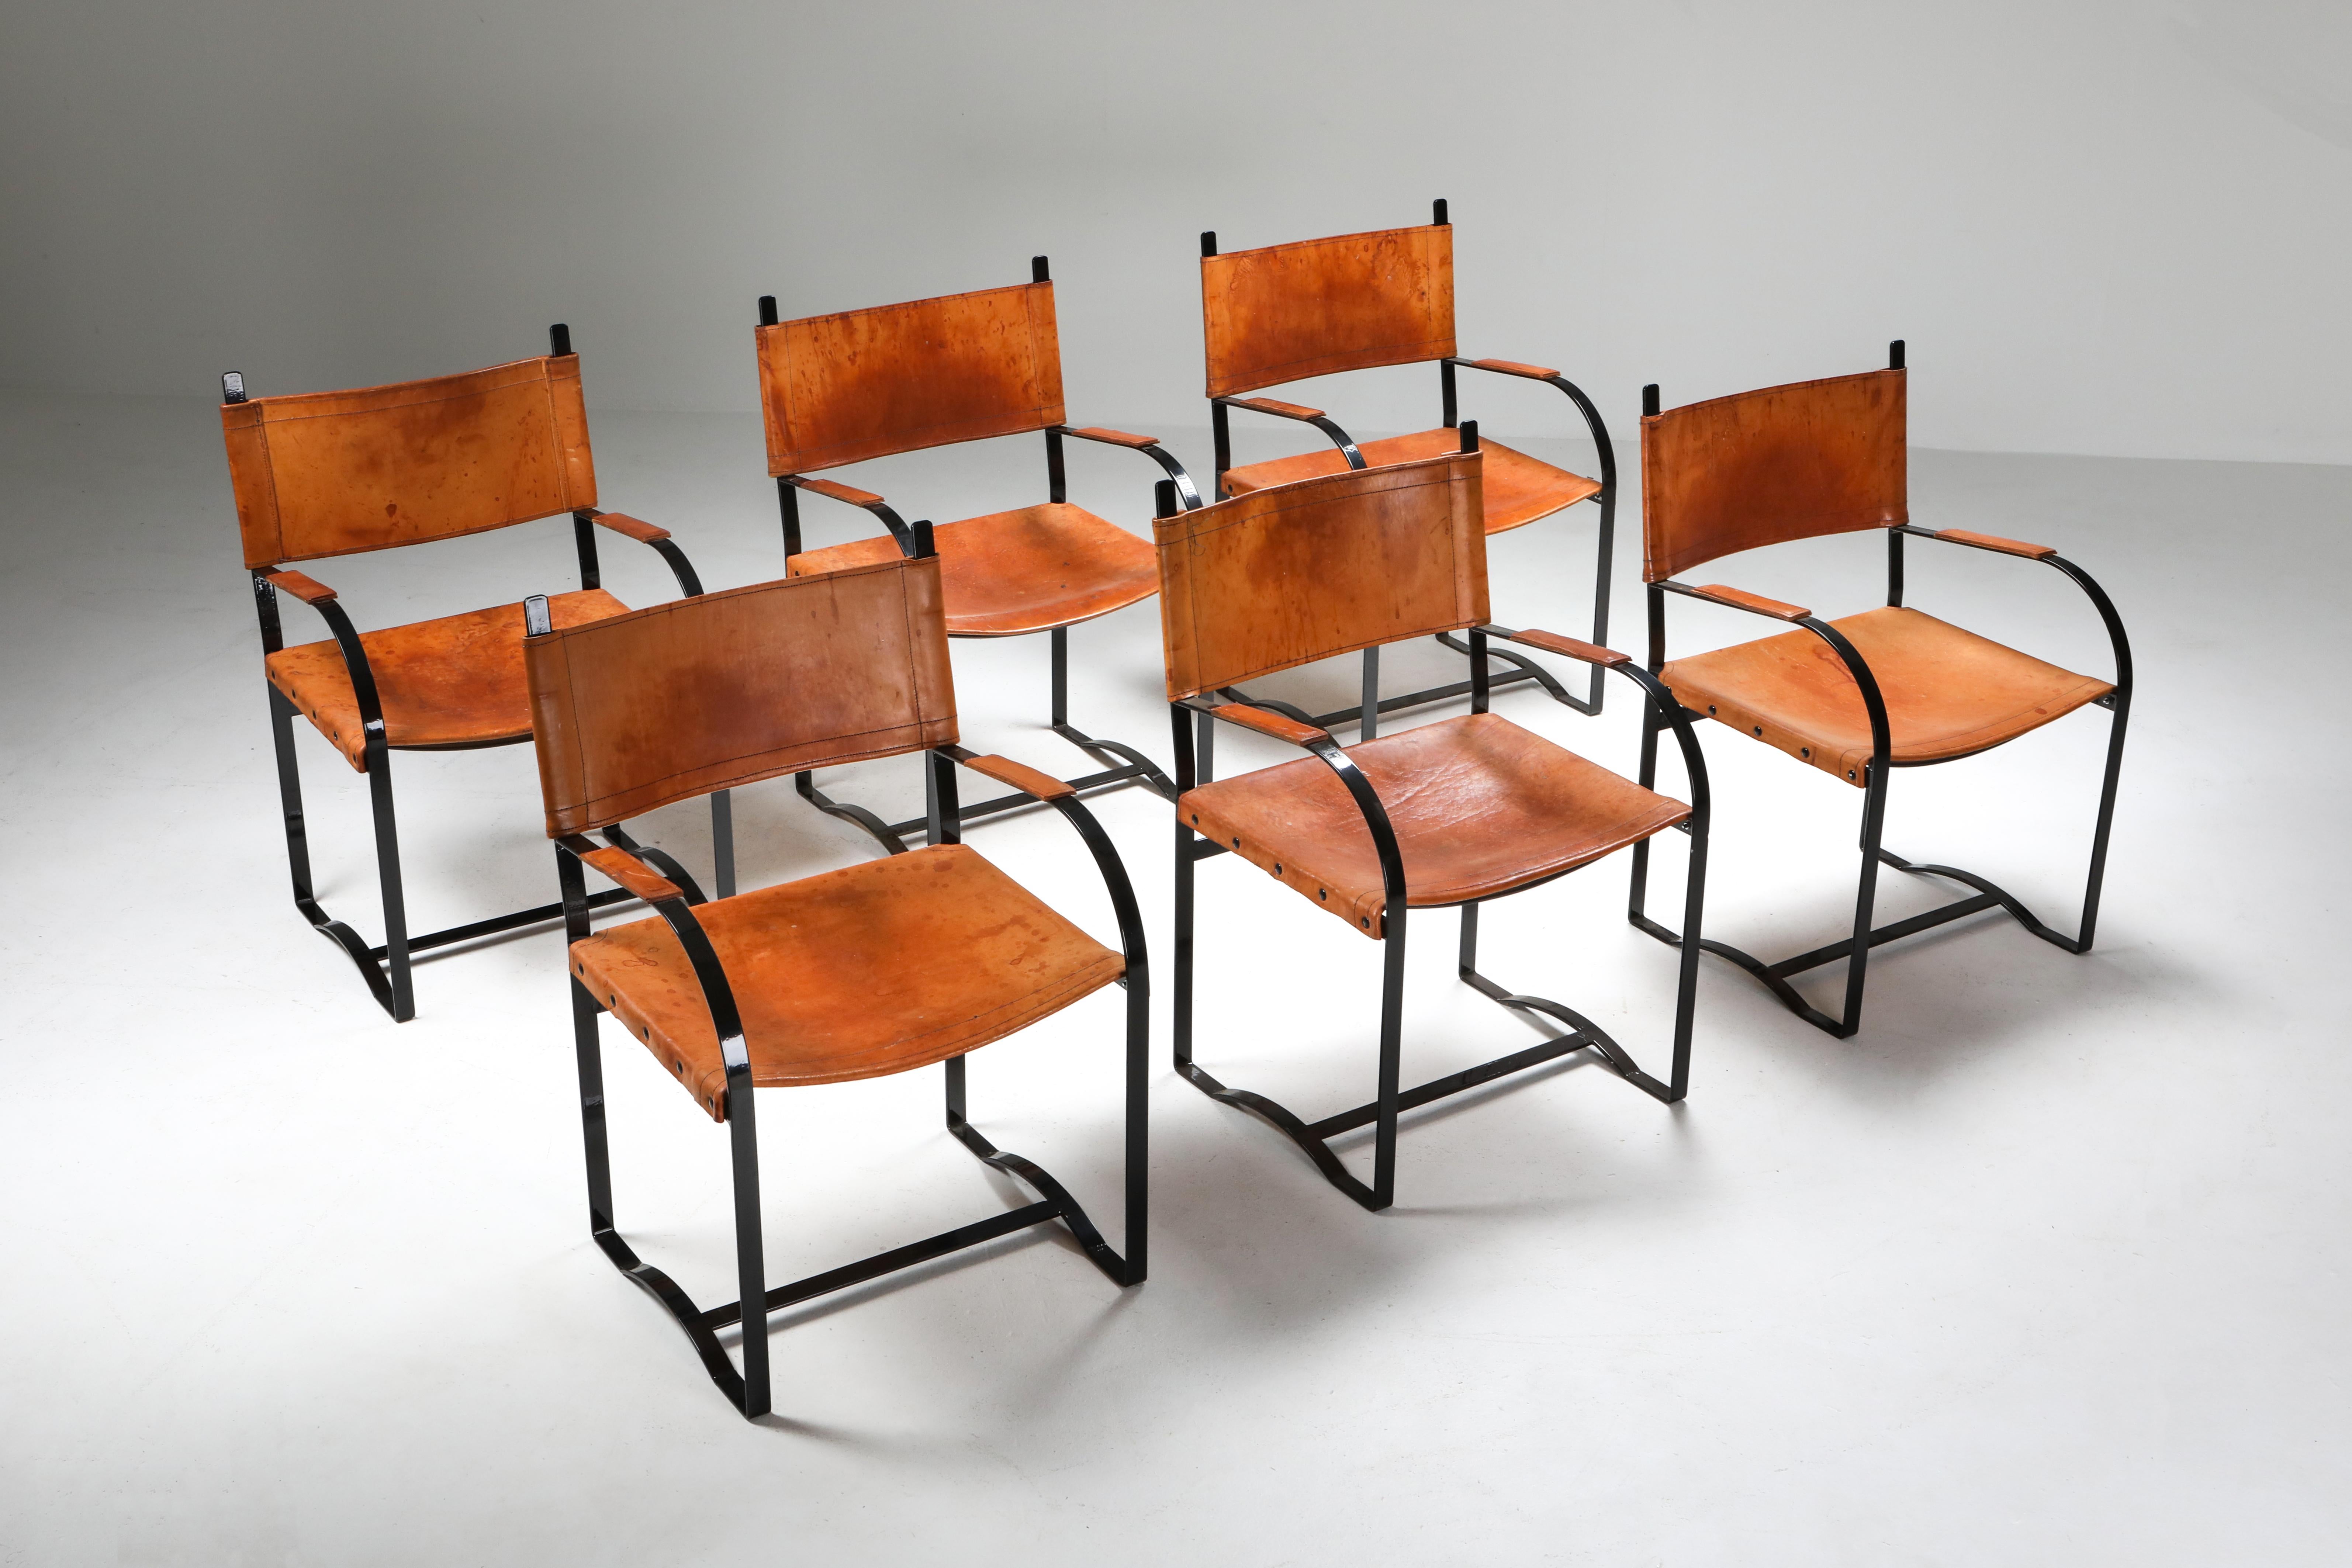 black lacquer steel and patinated cognac leather chairs, set of six, Belgium, 1960s

Unusual set of six side chairs, thick leather seating, solid steel frame
They would fit well in a rustic modern, chalet style interior.

  